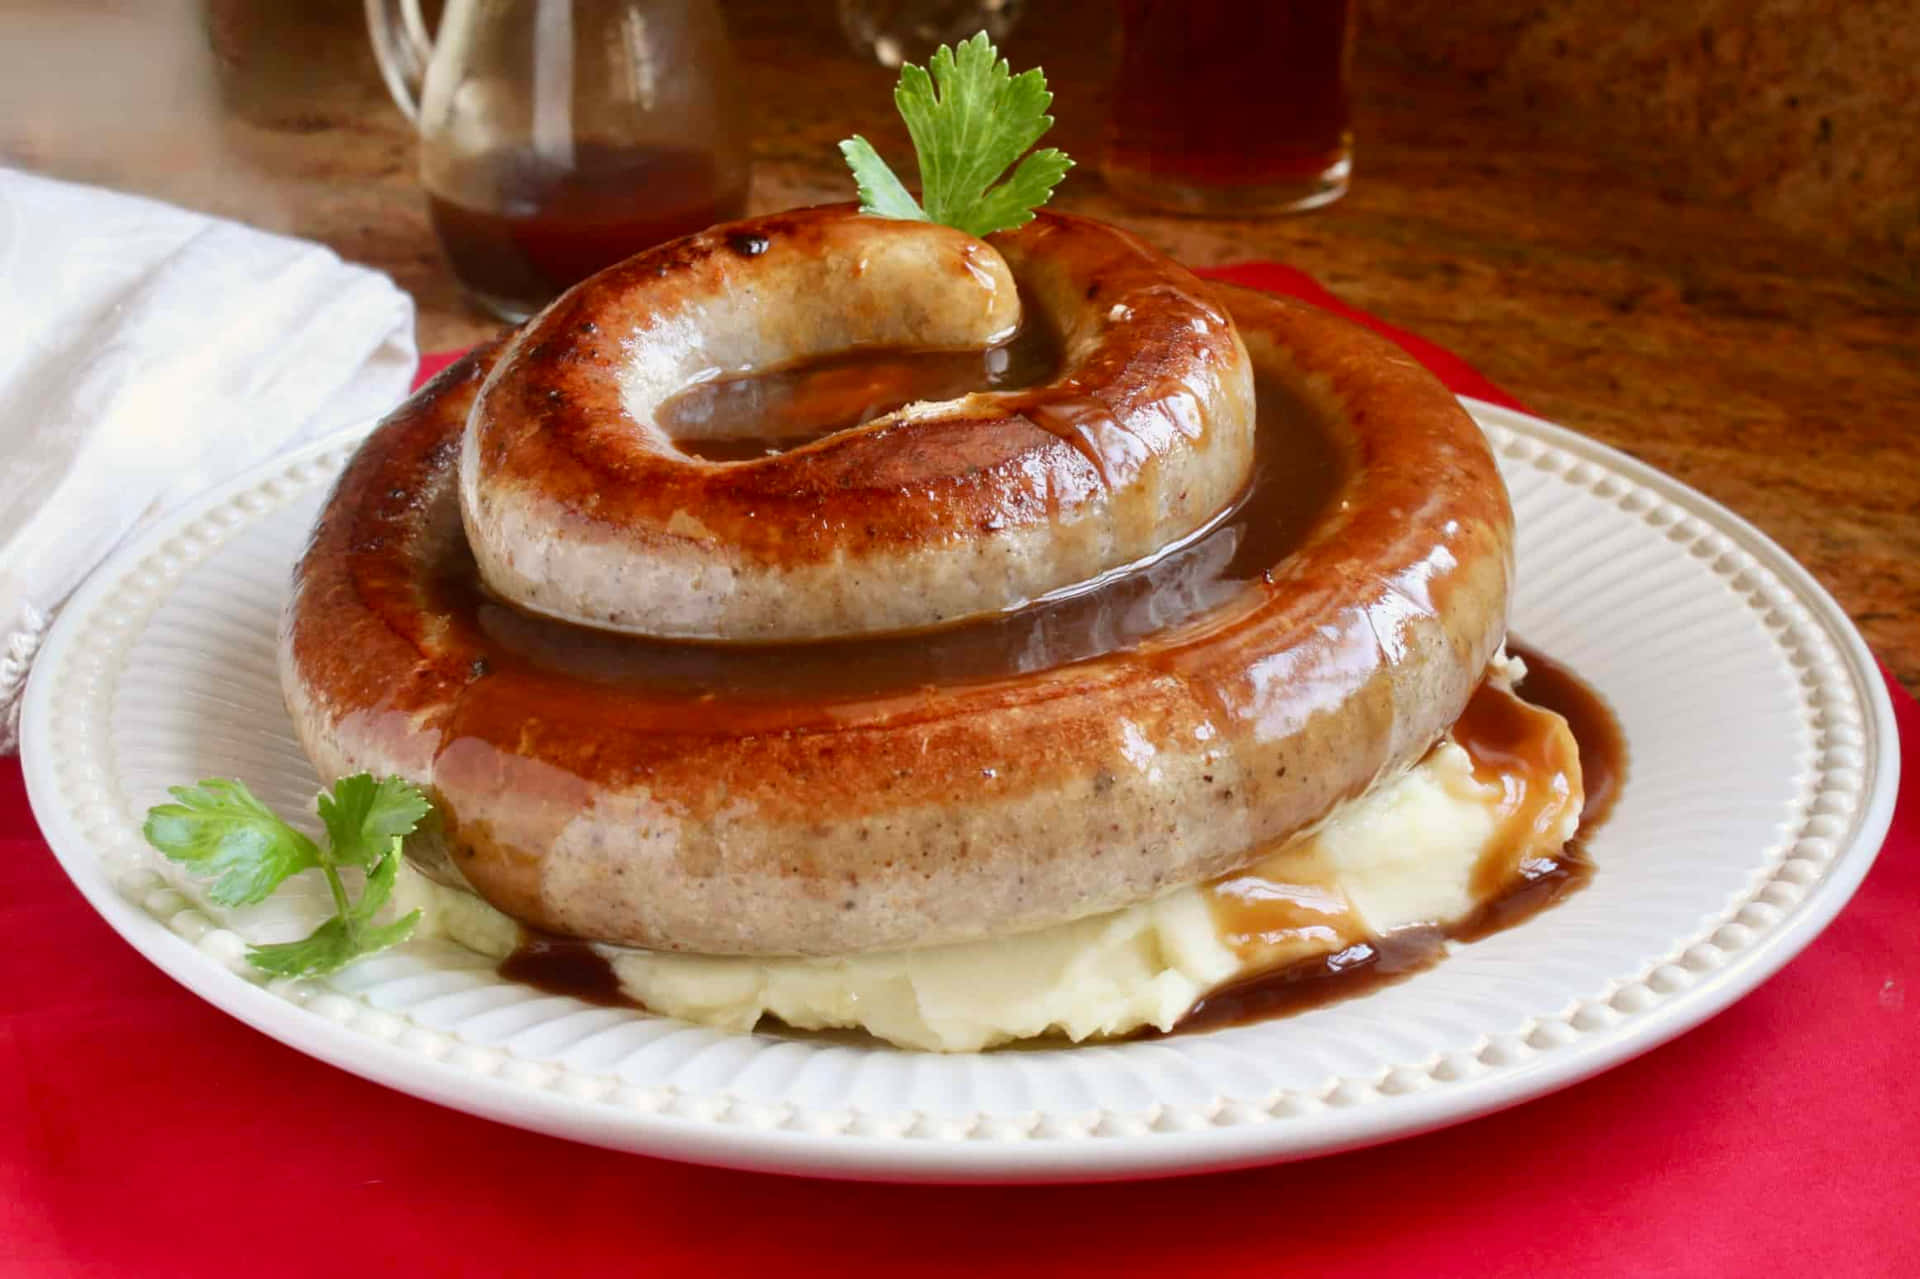 A Plate With A Sausage And Gravy On It